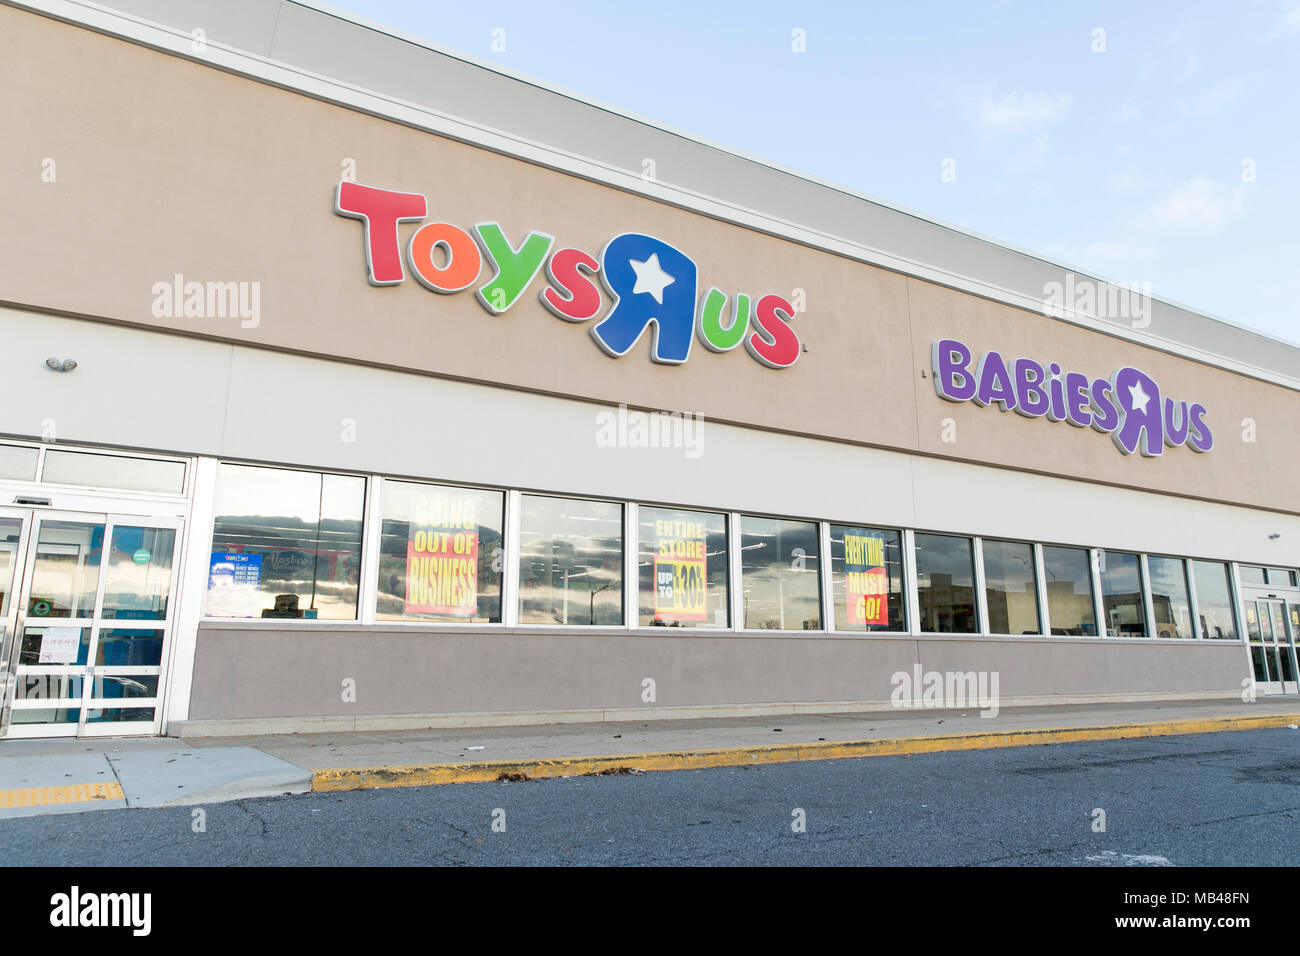 Frederick, Maryland, USA. 5th Apr, 2018. A logo sign outside of a Toys 'R' Us retail store in Hagerstown, Maryland with 'Going Out Of Business' signage on April 5, 2018. The toy retailer, which has struggled under a heavy debt load, announced its bankruptcy and plan to liquidate all of its stores in March. Credit: Kristoffer Tripplaar/Alamy Live News Stock Photo